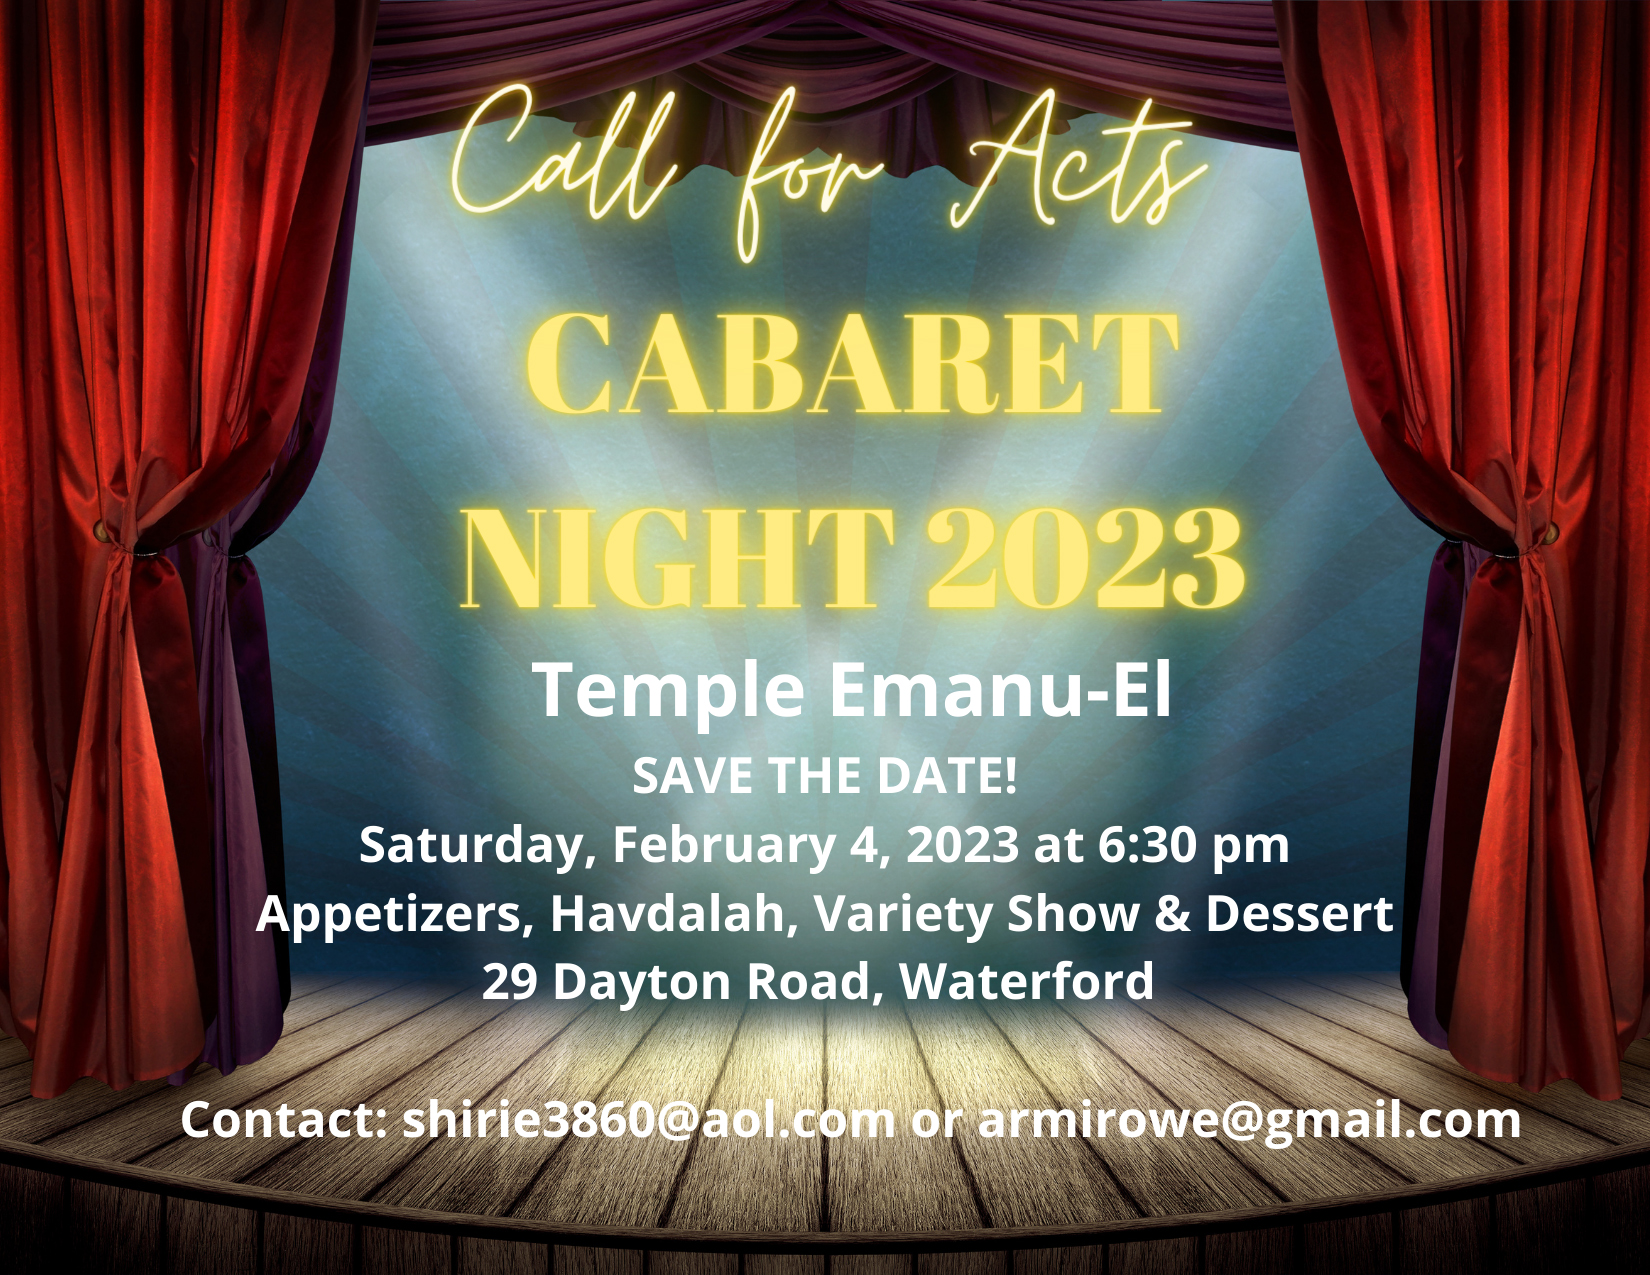 Cabaret 2023 – Call for Acts